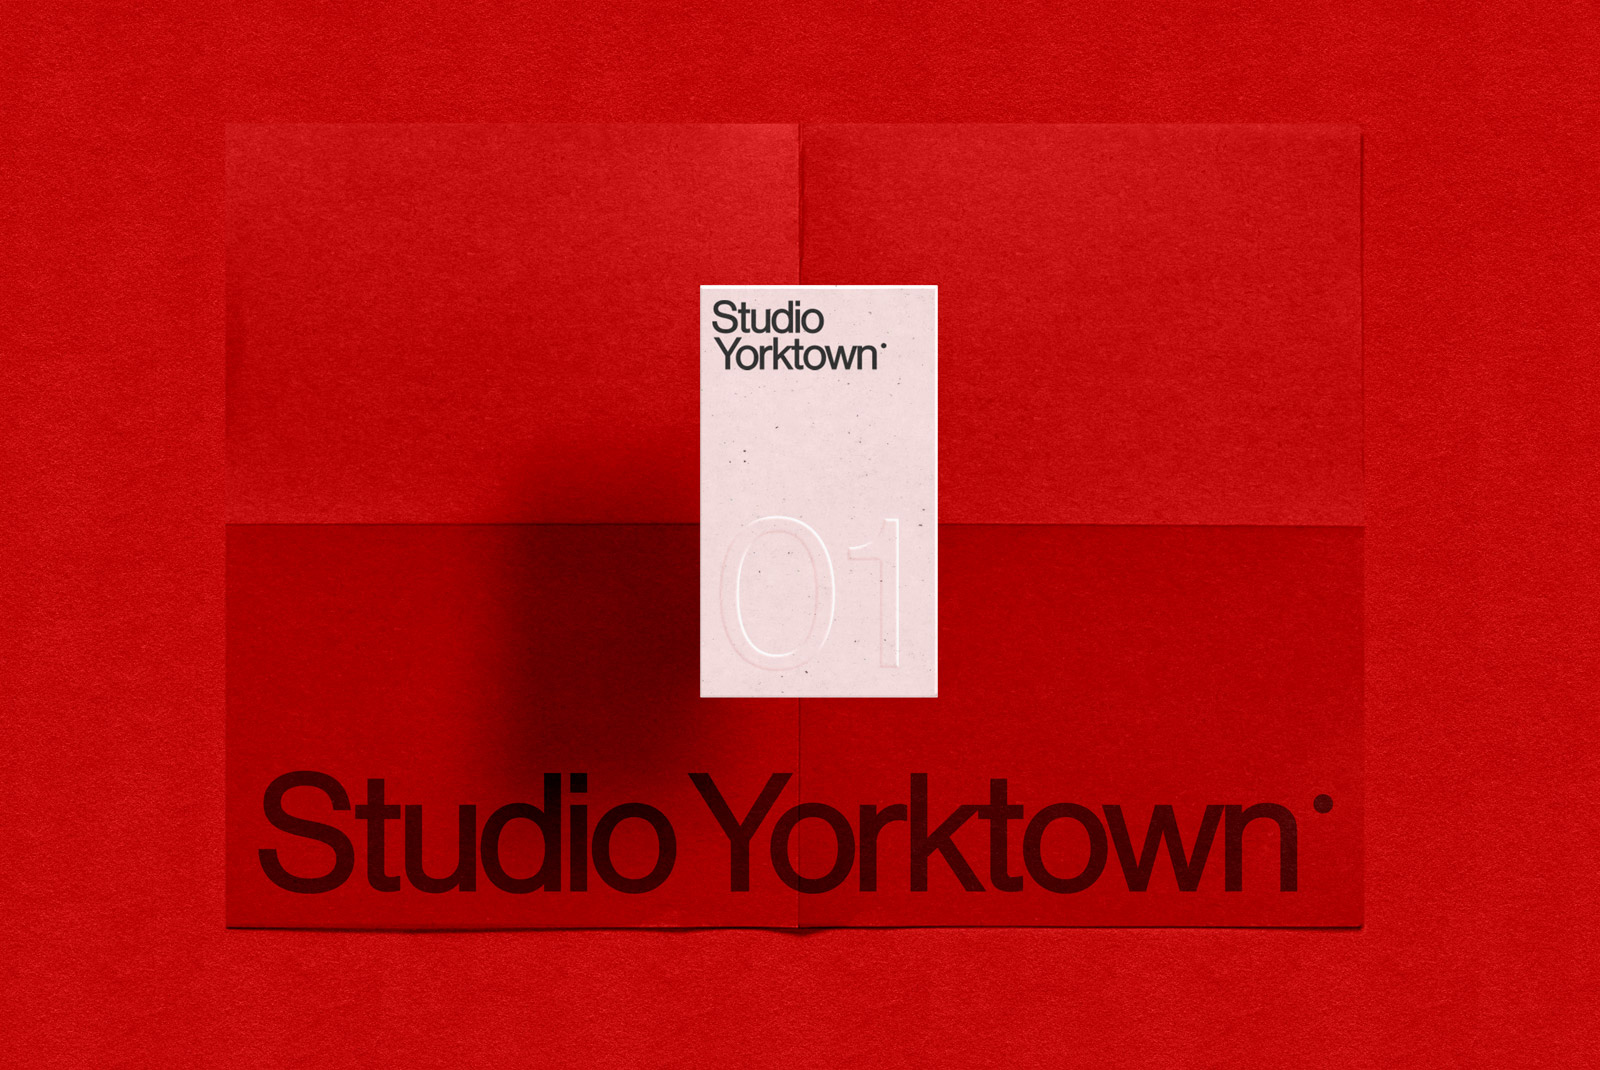 Elegant paper mockup on red textured background with embossed font showcasing Studio Yorktown design perfect for presentations and portfolios